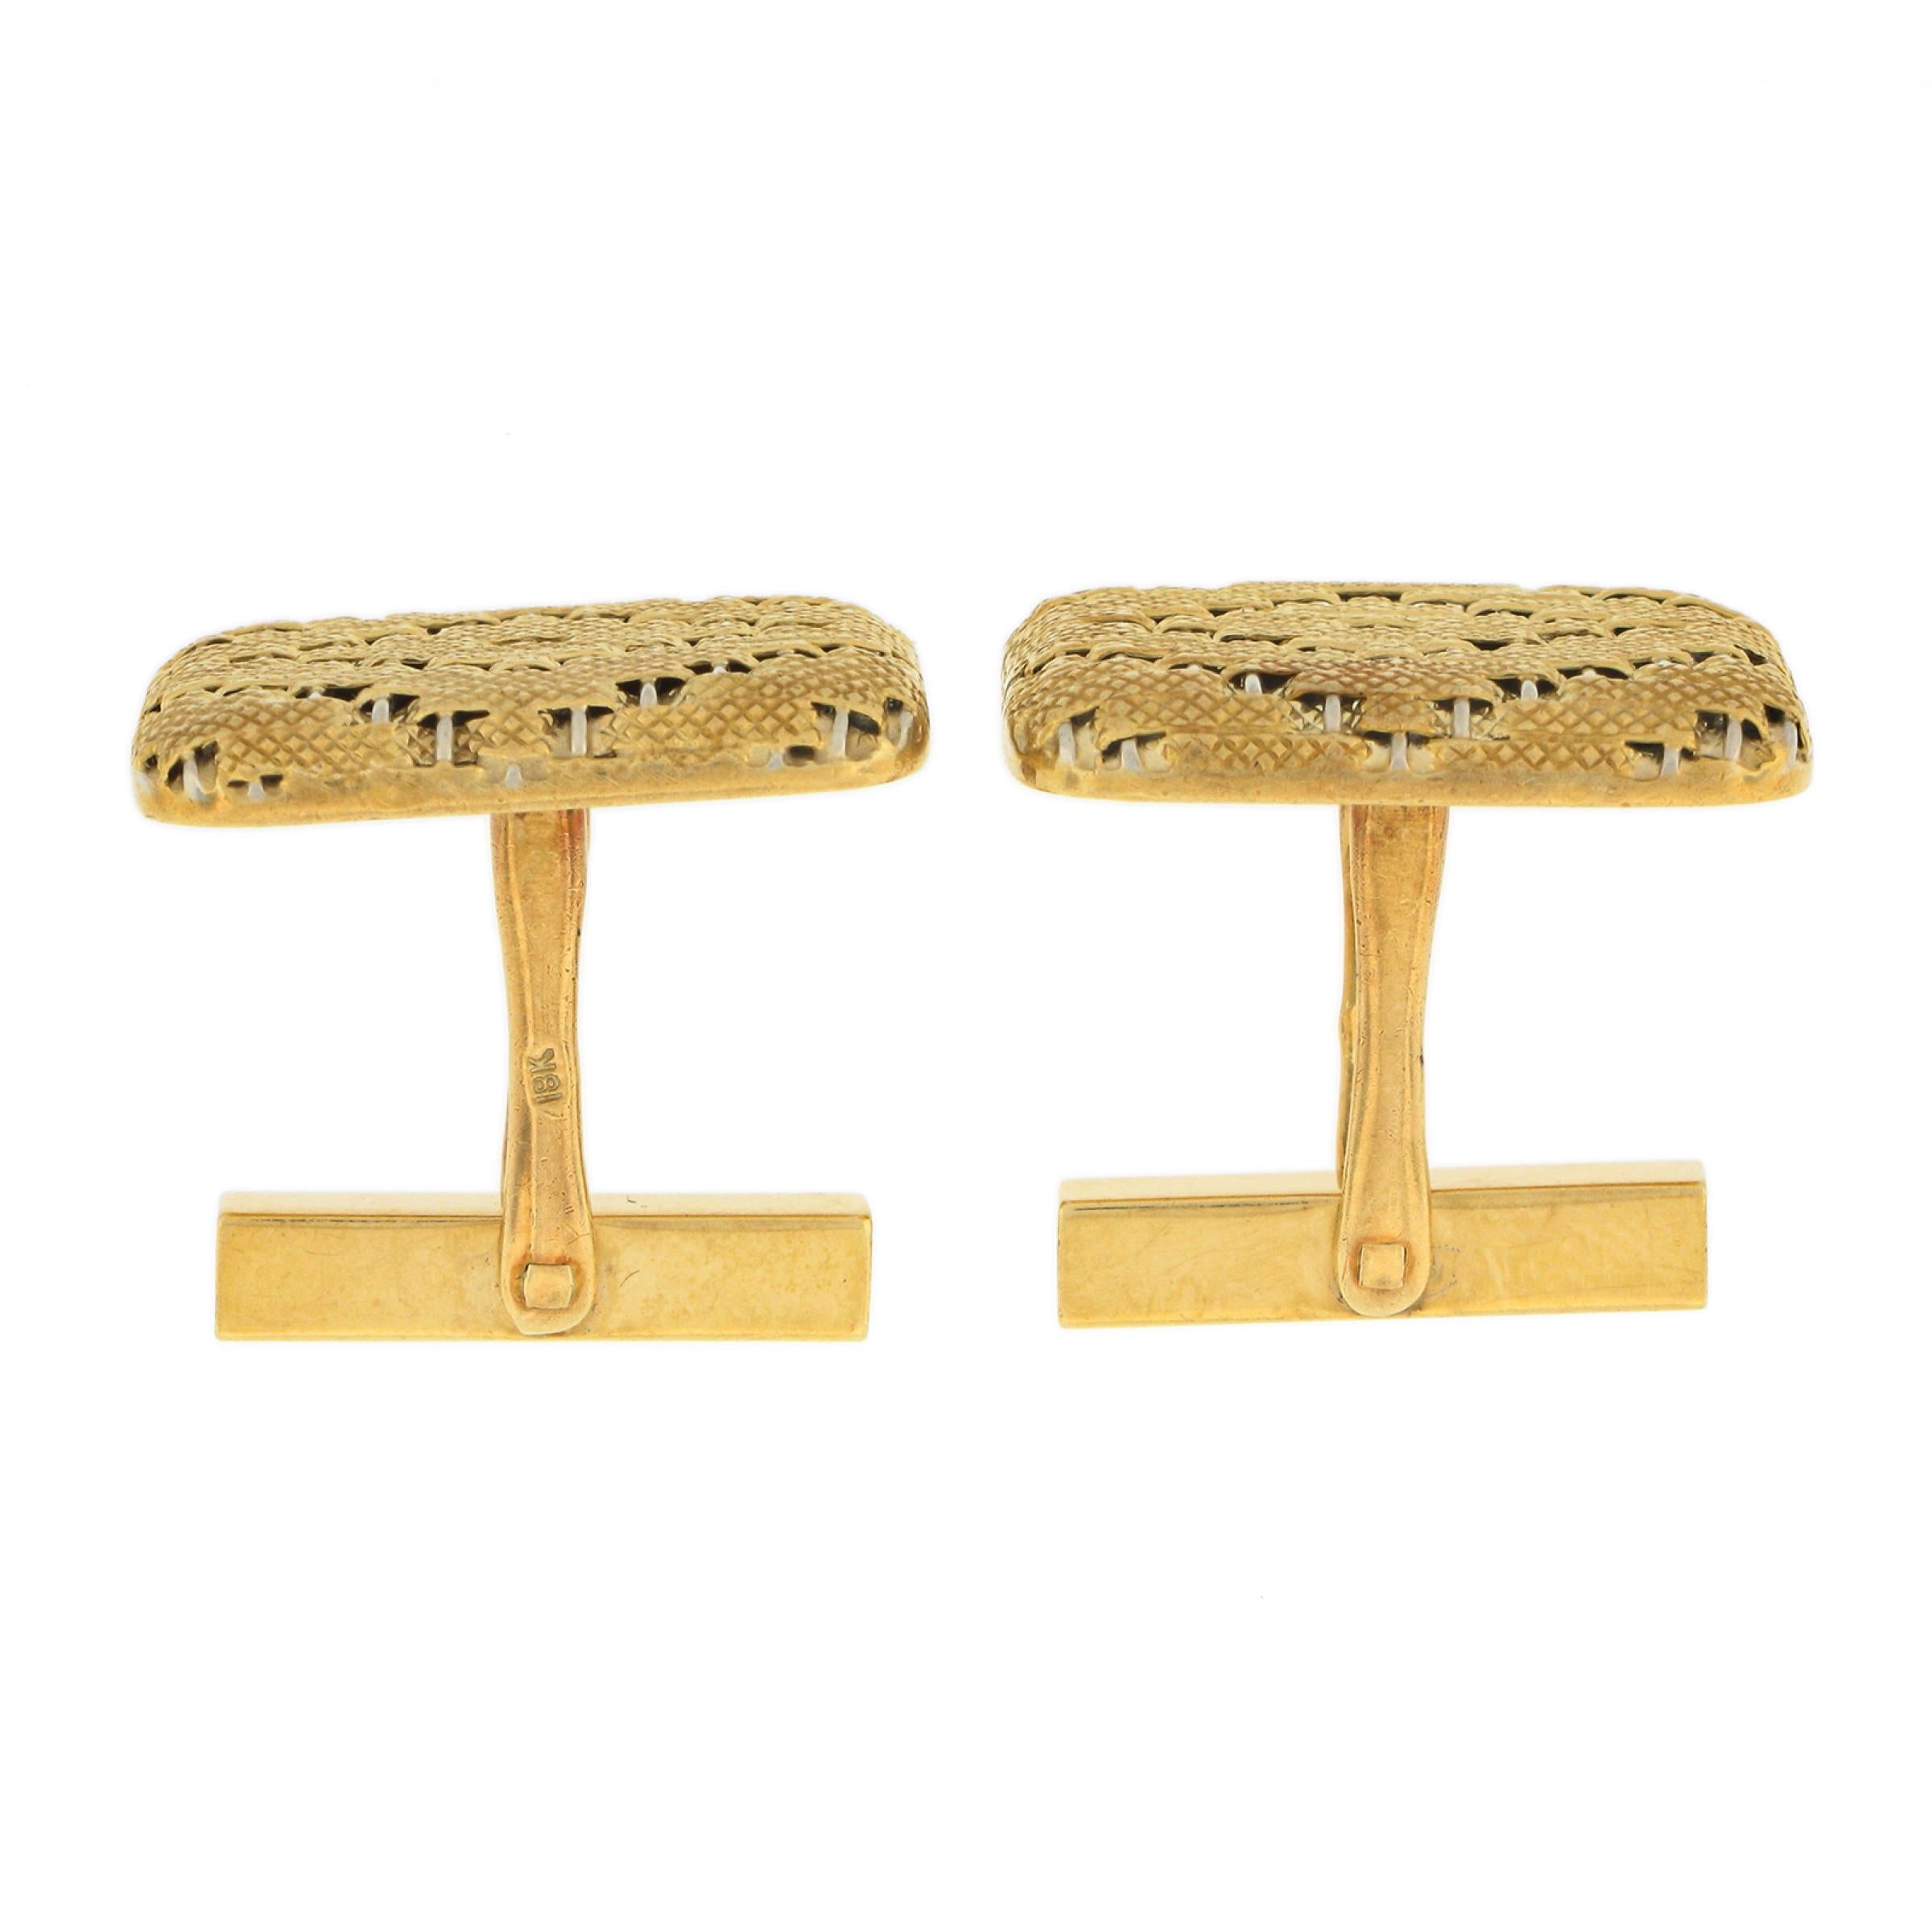 Vintage Tiffany & Co. Men's 18k Two Tone Gold Woven Textured Platter Cuff Links For Sale 1